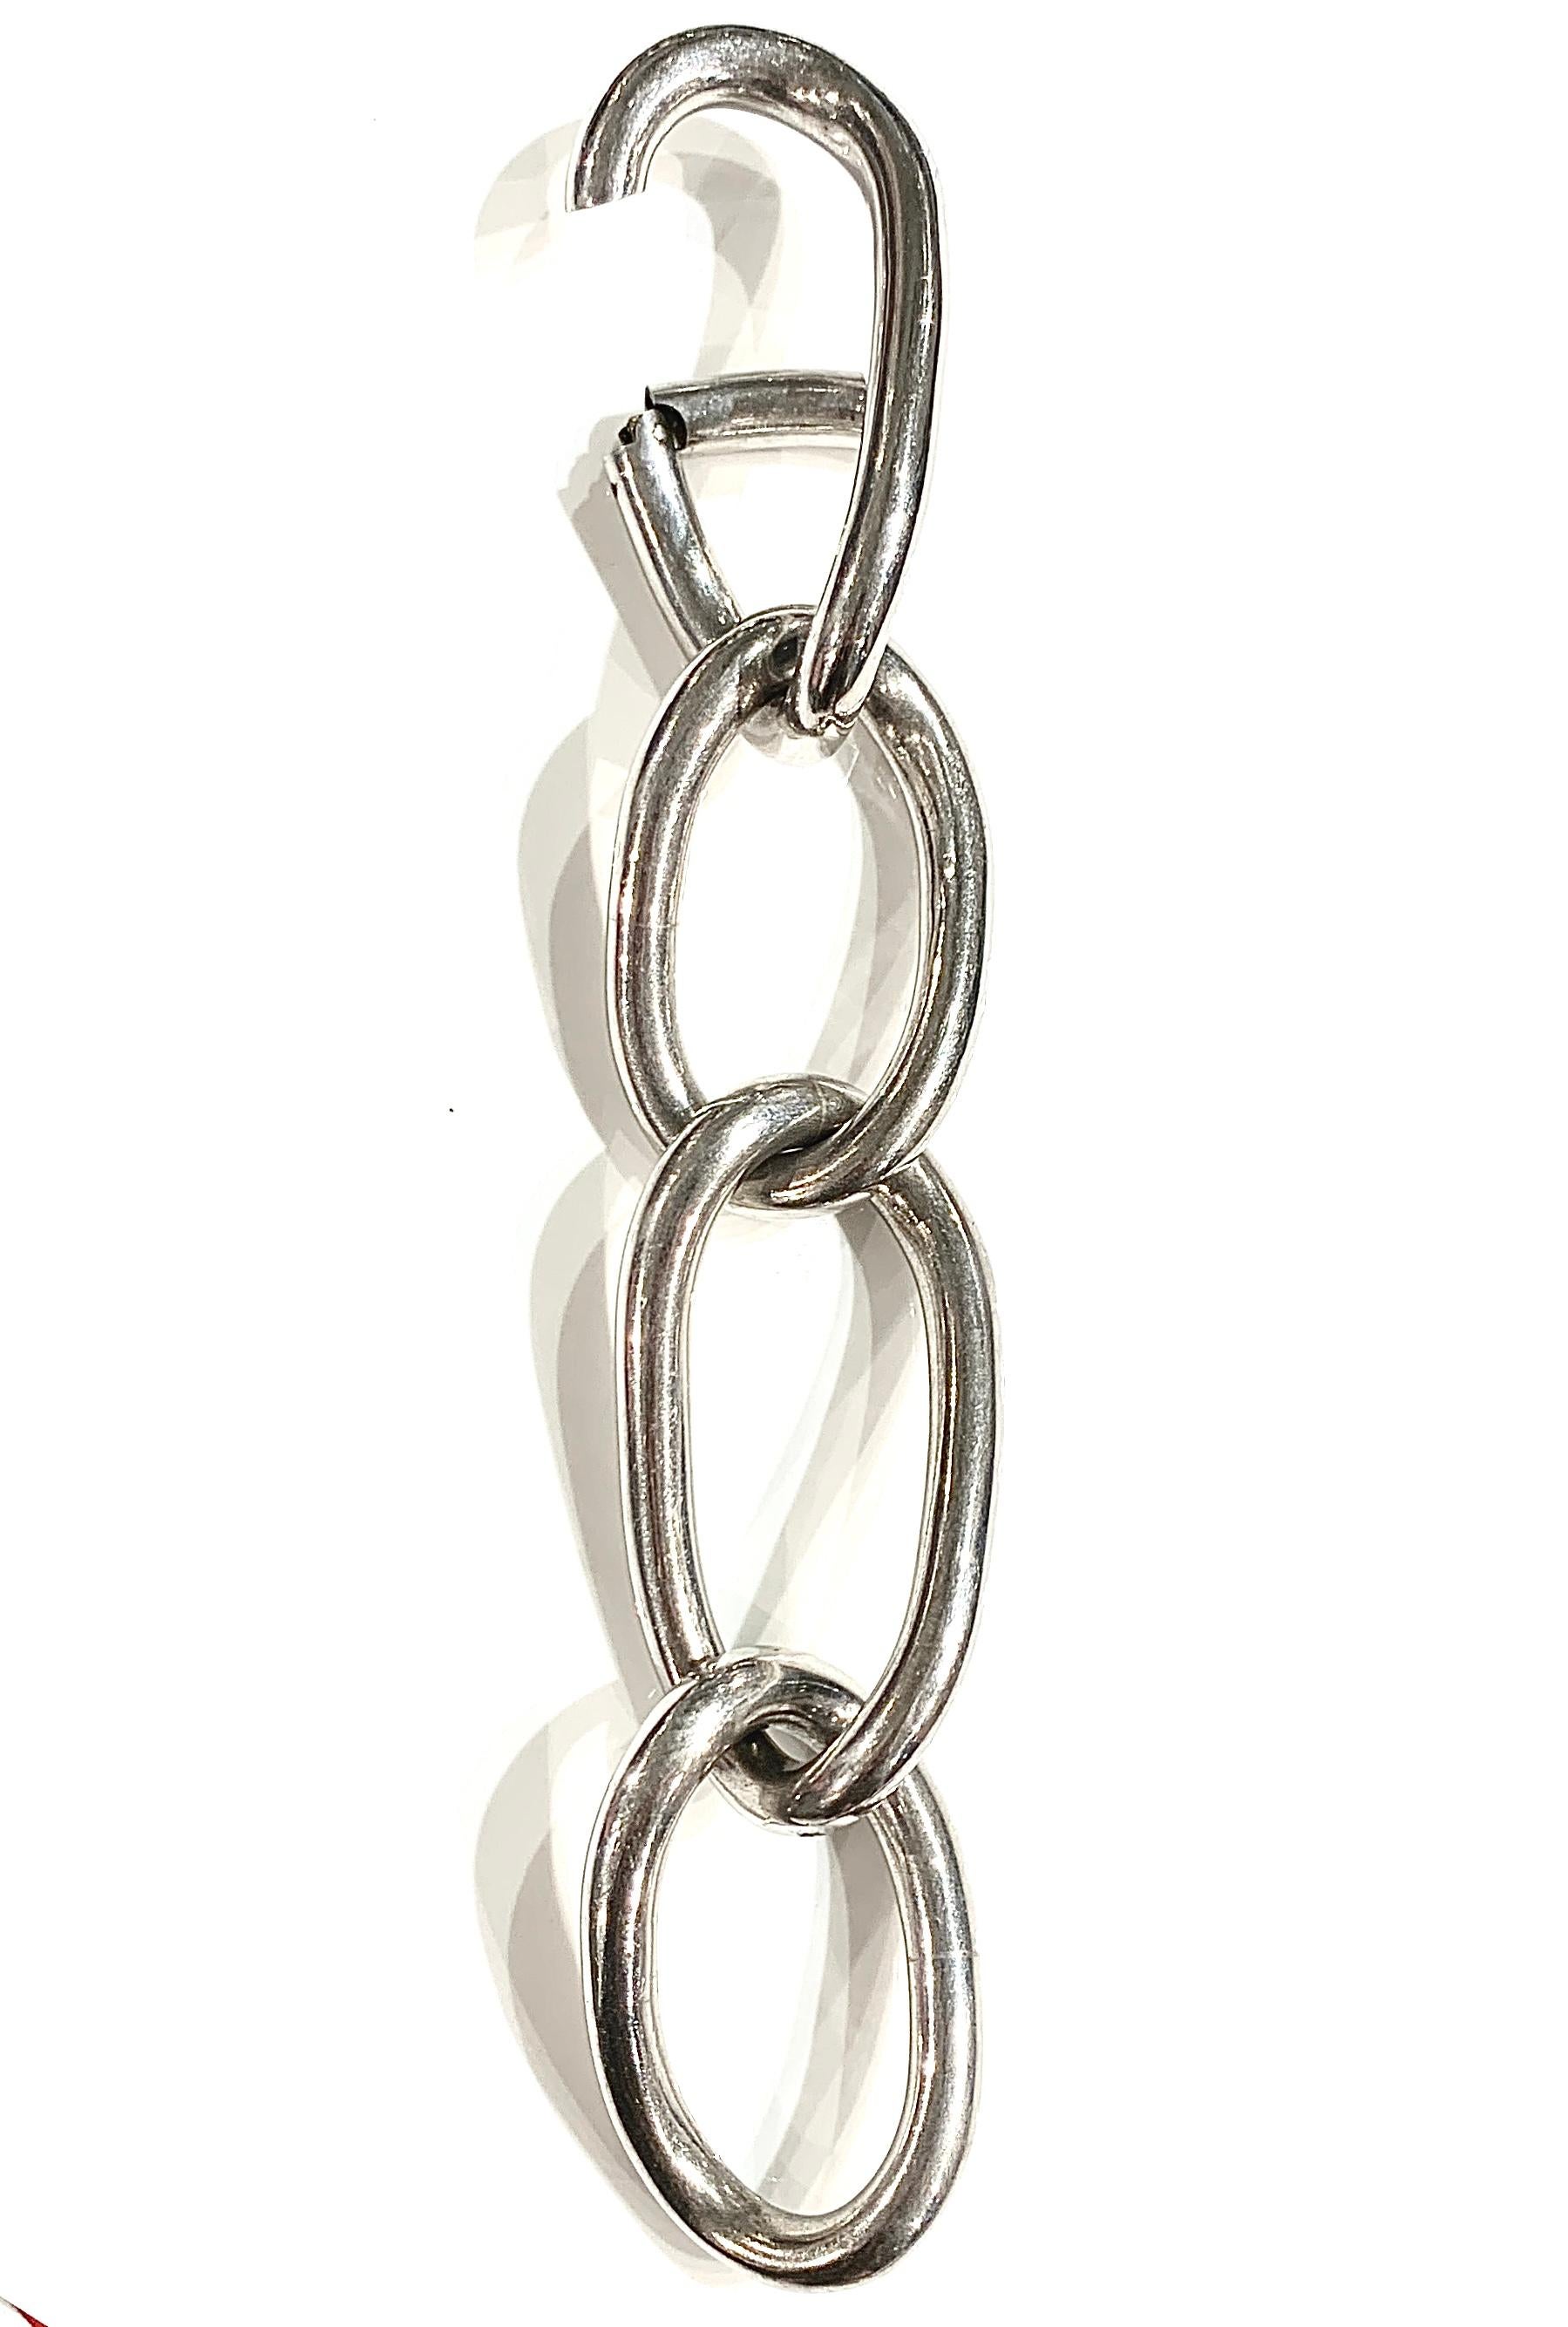 Set of 925 silver maxi chains designed in 2008 by Martin Margiela in collaboration with Damiani. The set consists of a necklace, a ring and a bracelet on which Maison Martin Margiela's brand name is displayed.
The ring is composed of four rings